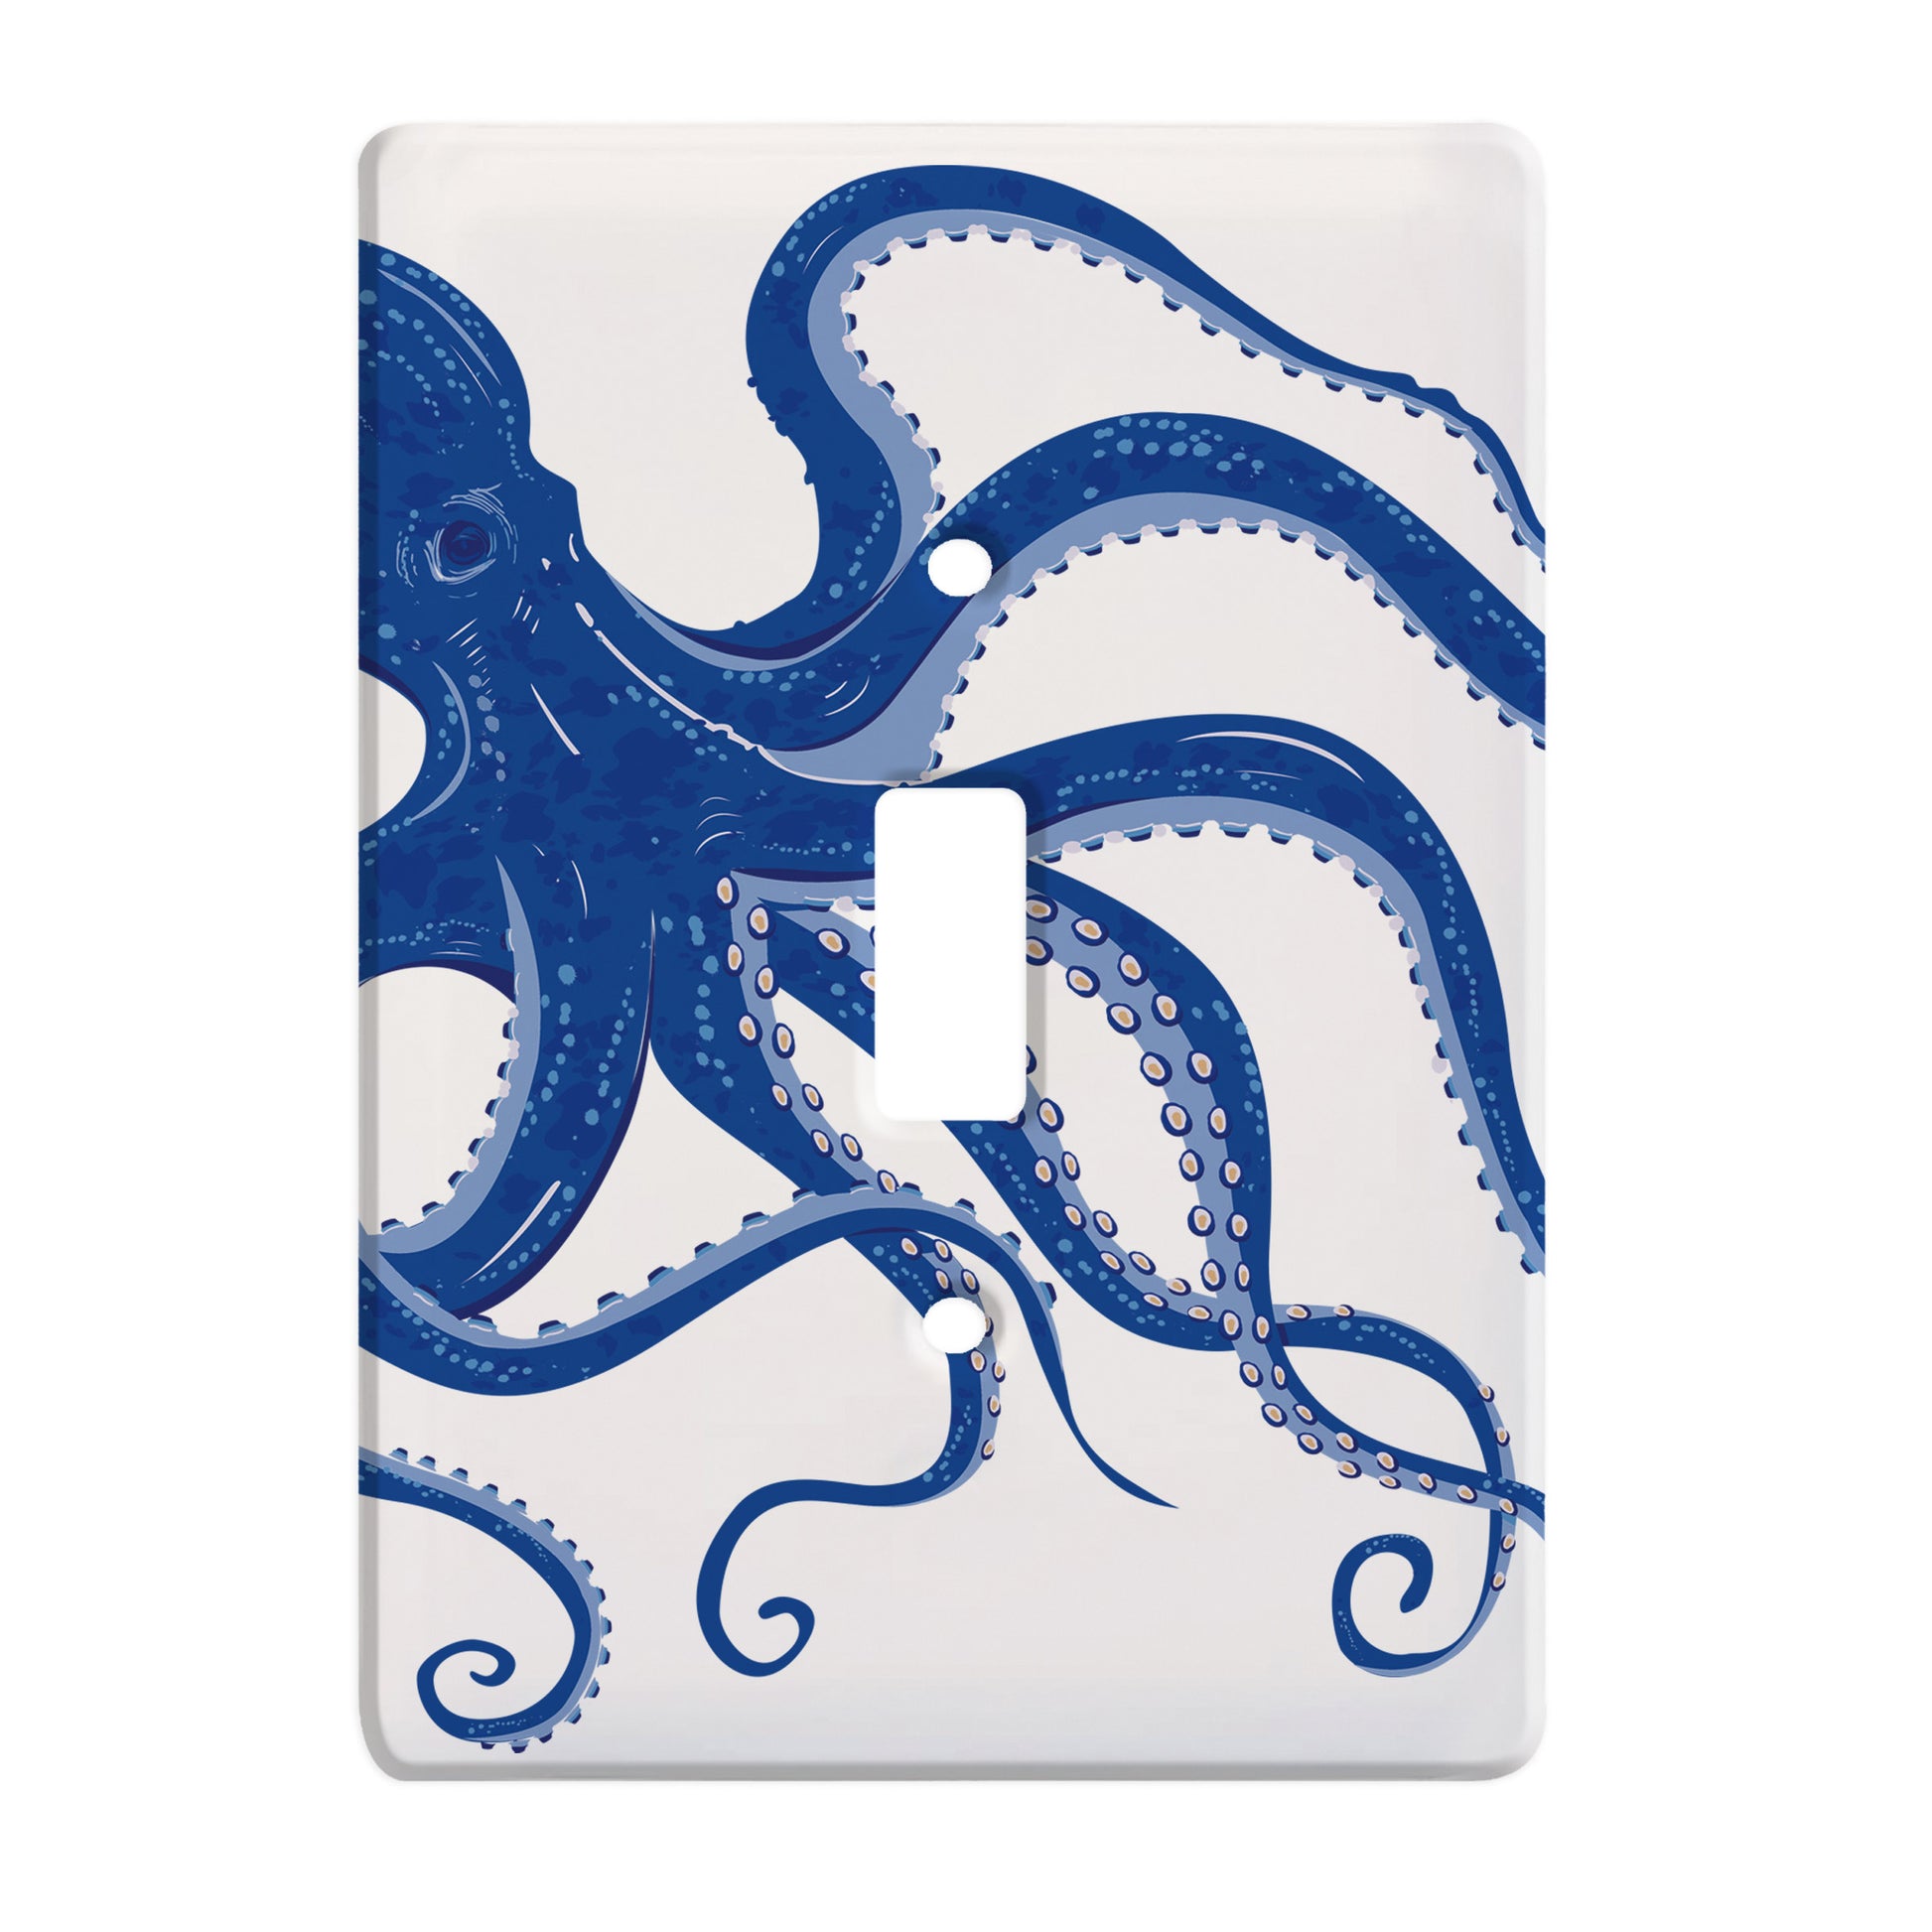 ceramic single toggle switch plate featuring blue octopus. 